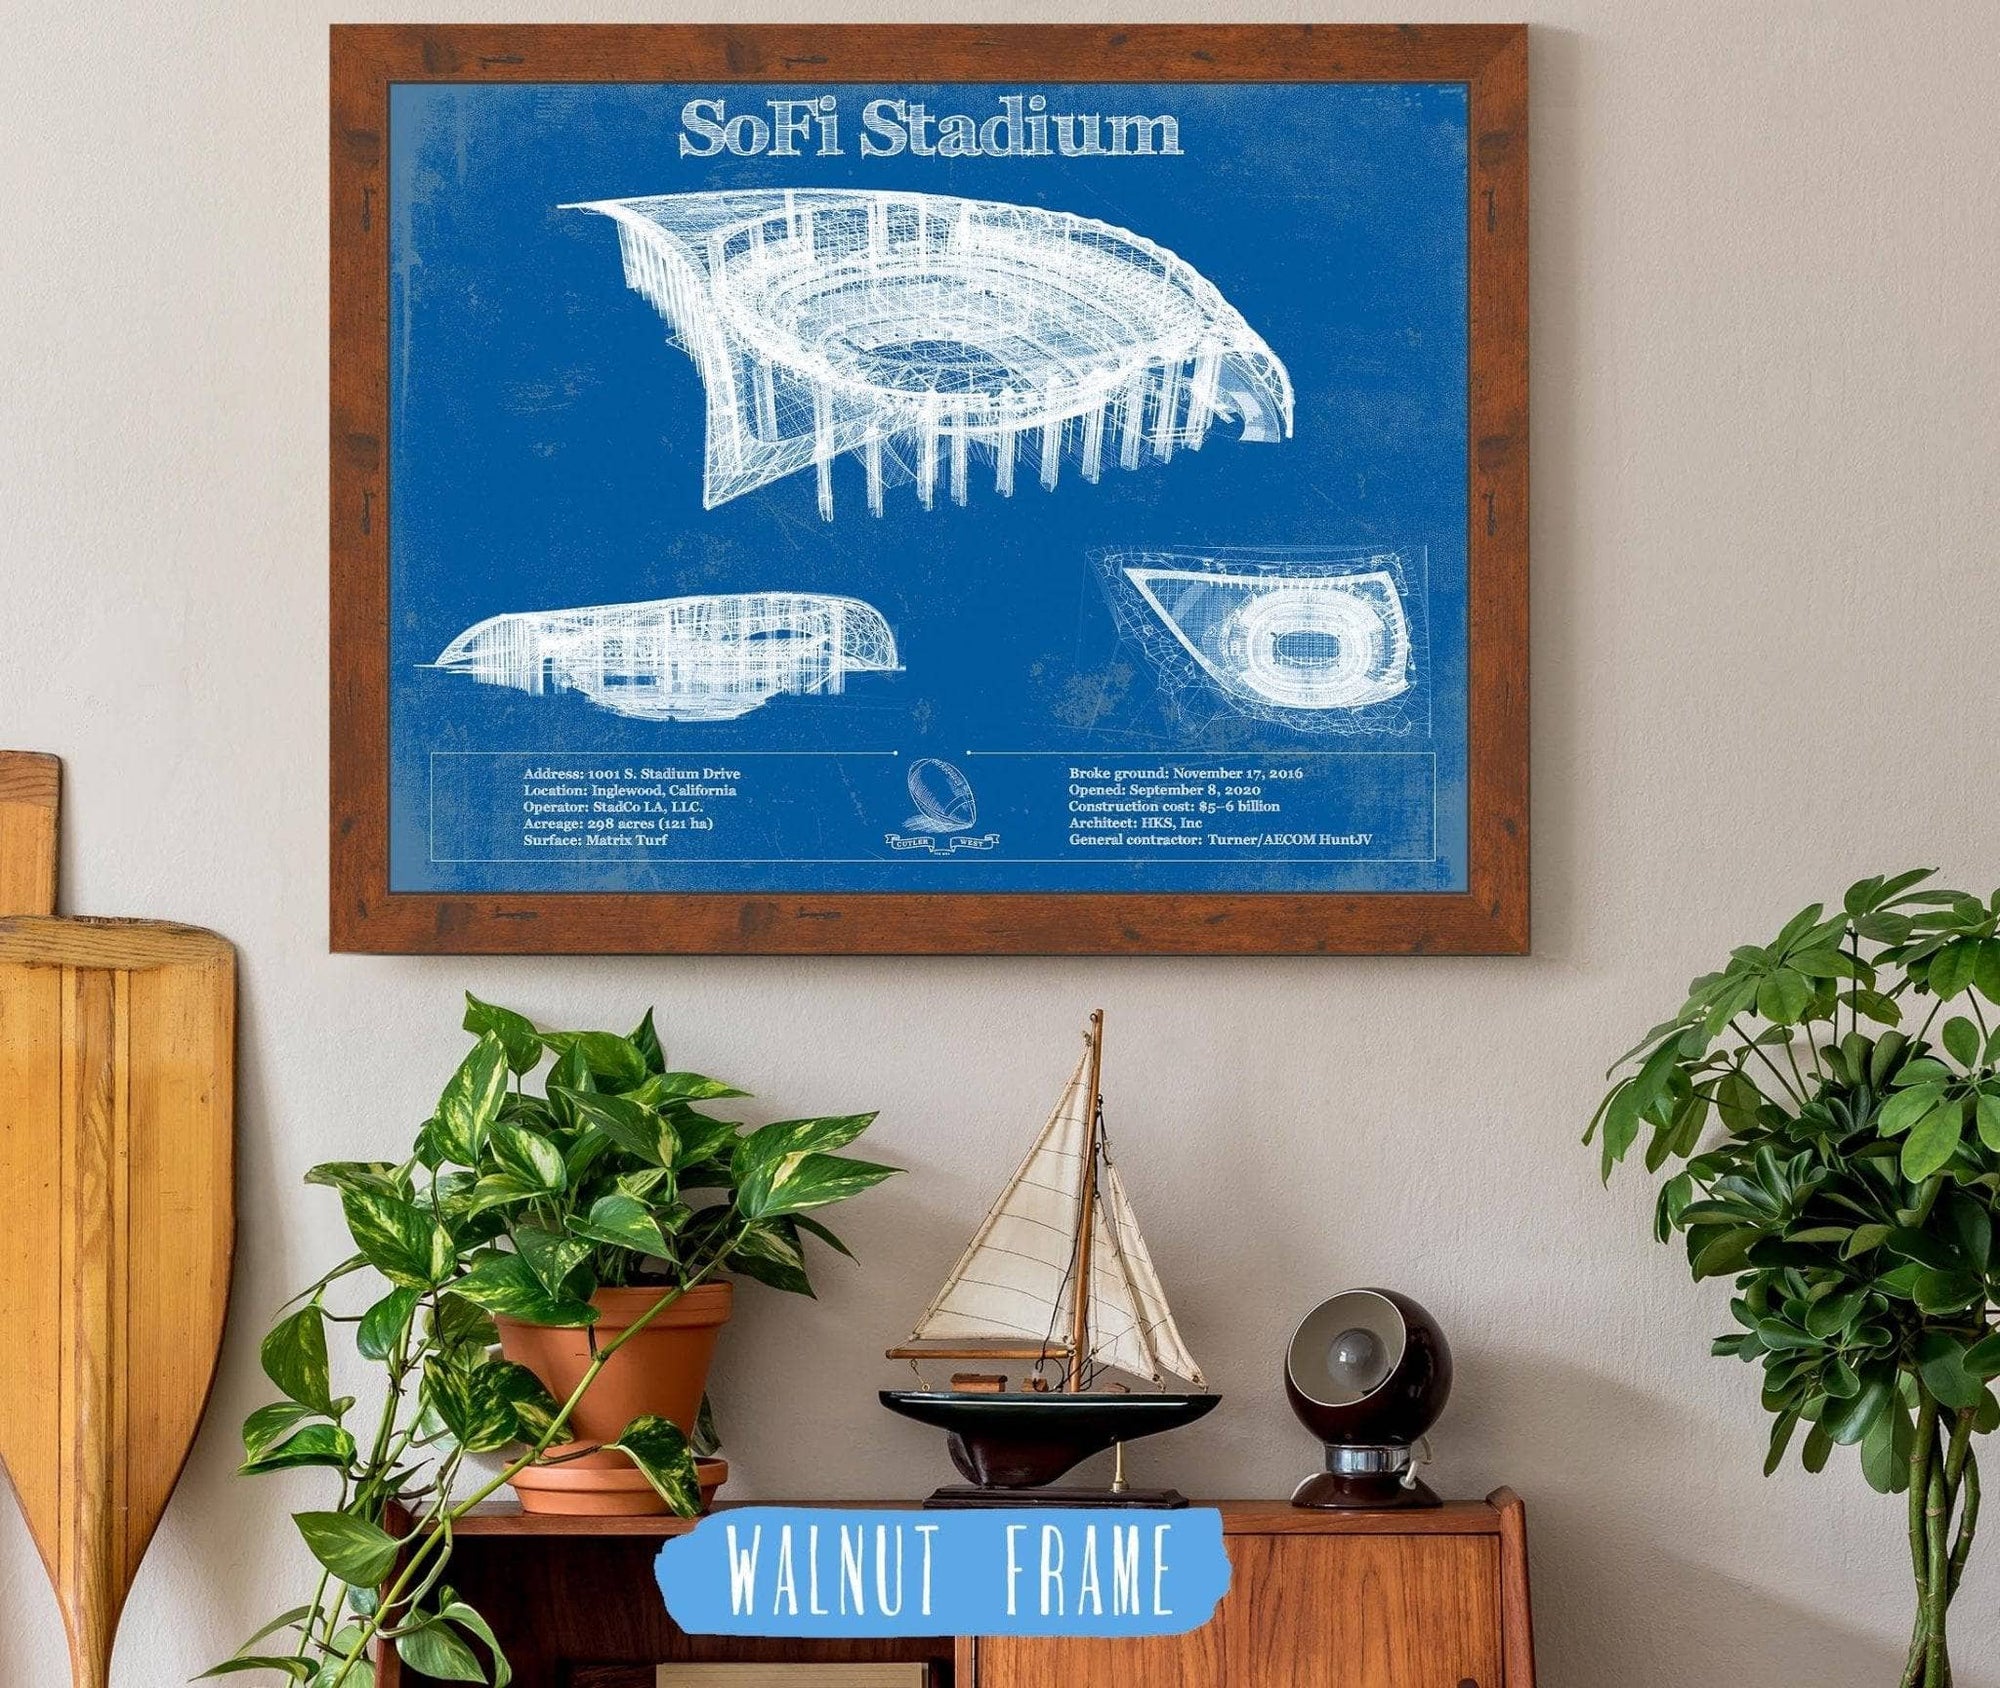 Cutler West Pro Football Collection Los Angeles Chargers - SoFi Stadium Vintage Football Print